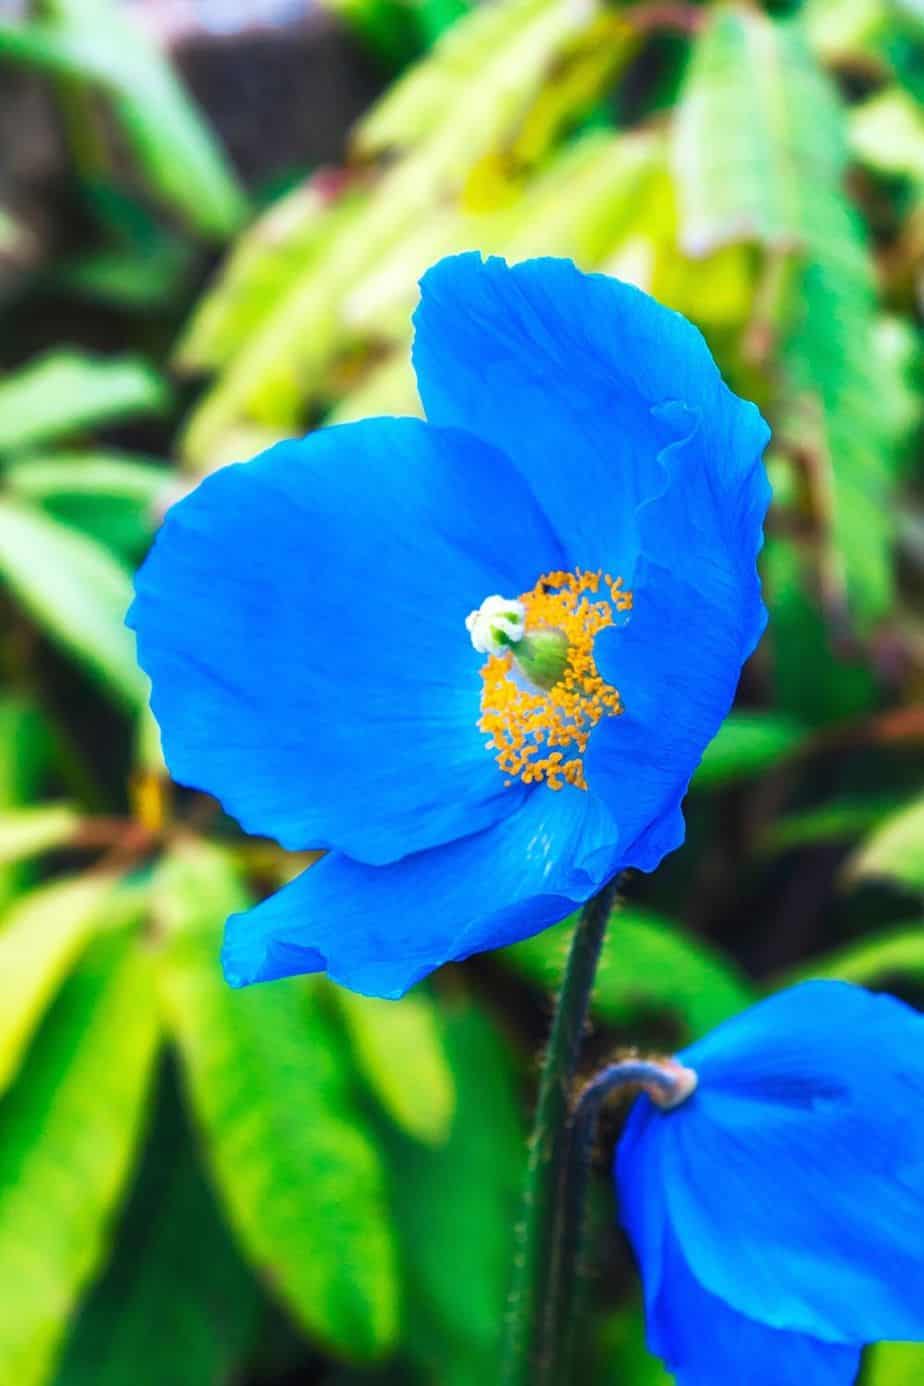 If you want a lovely pop of blue in the east-facing side of the house, Himalayan Blue Poppy is the best plant to go